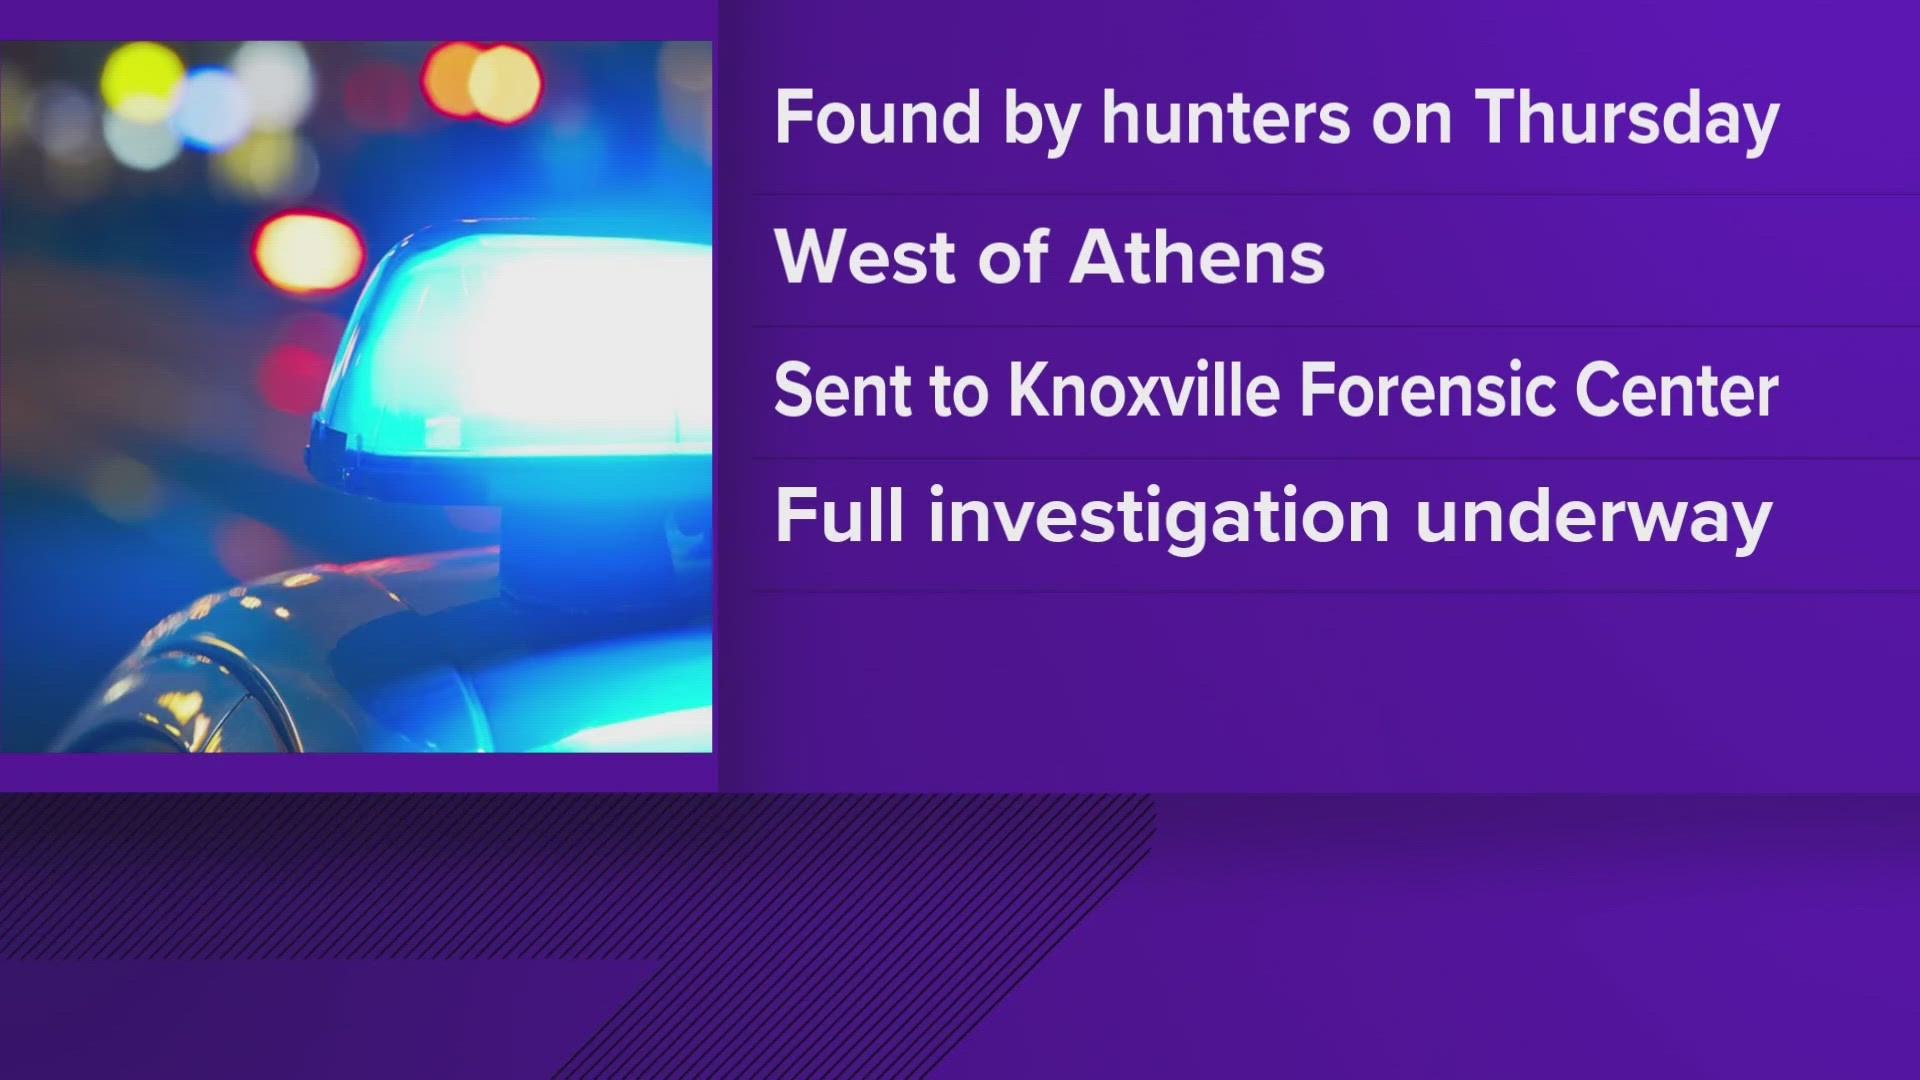 According to McMinn County Sheriff Joe Guy, hunters found what appeared to be skeletal human remains in a wooded area off Highway 30 west of Athens.